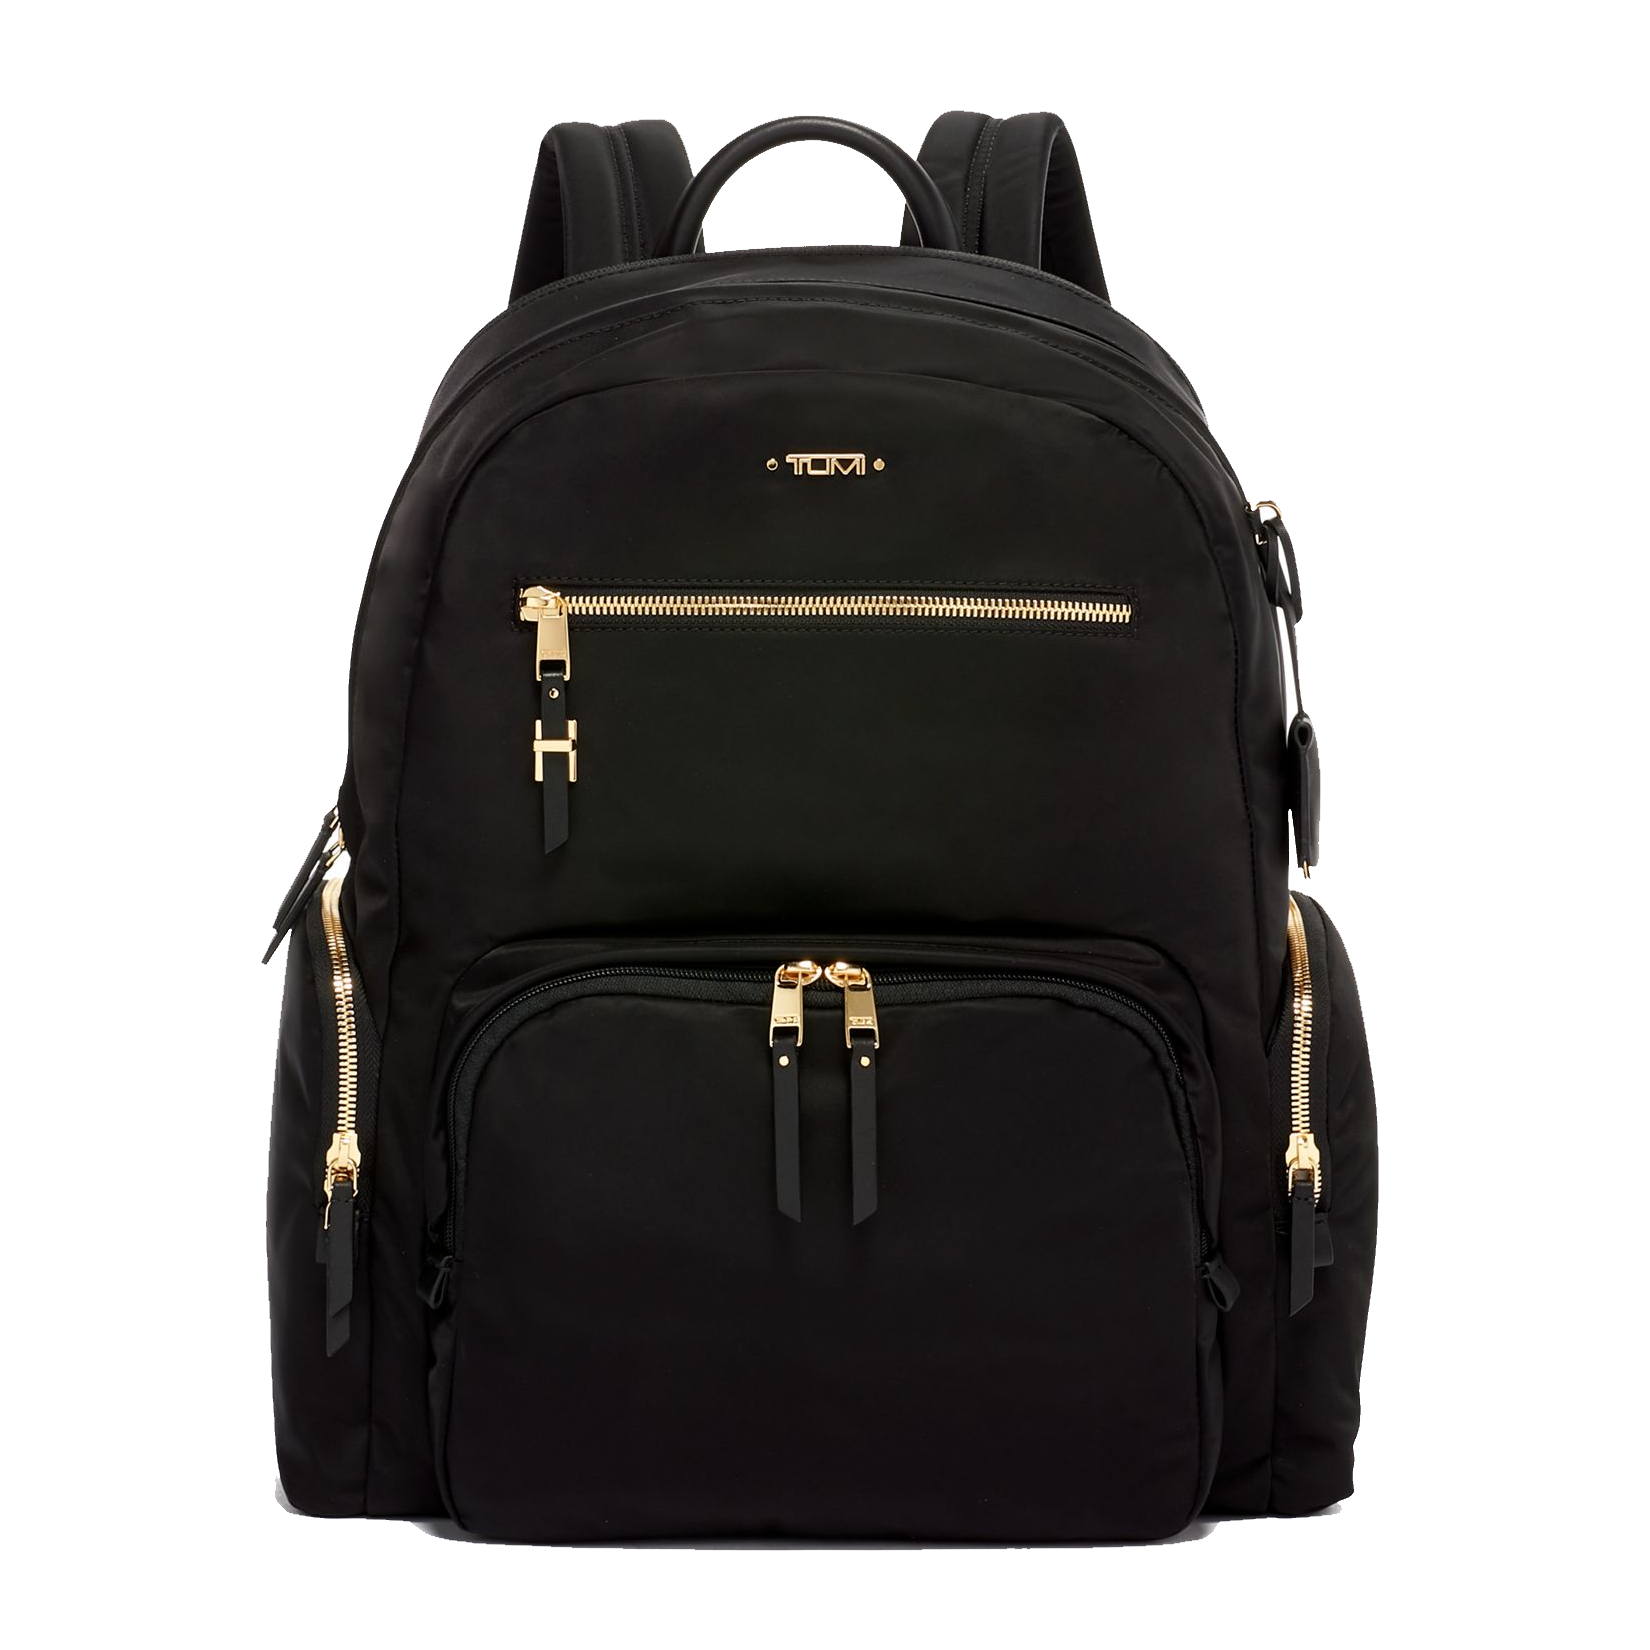 Details 74+ tumi laptop bags super hot - in.cdgdbentre